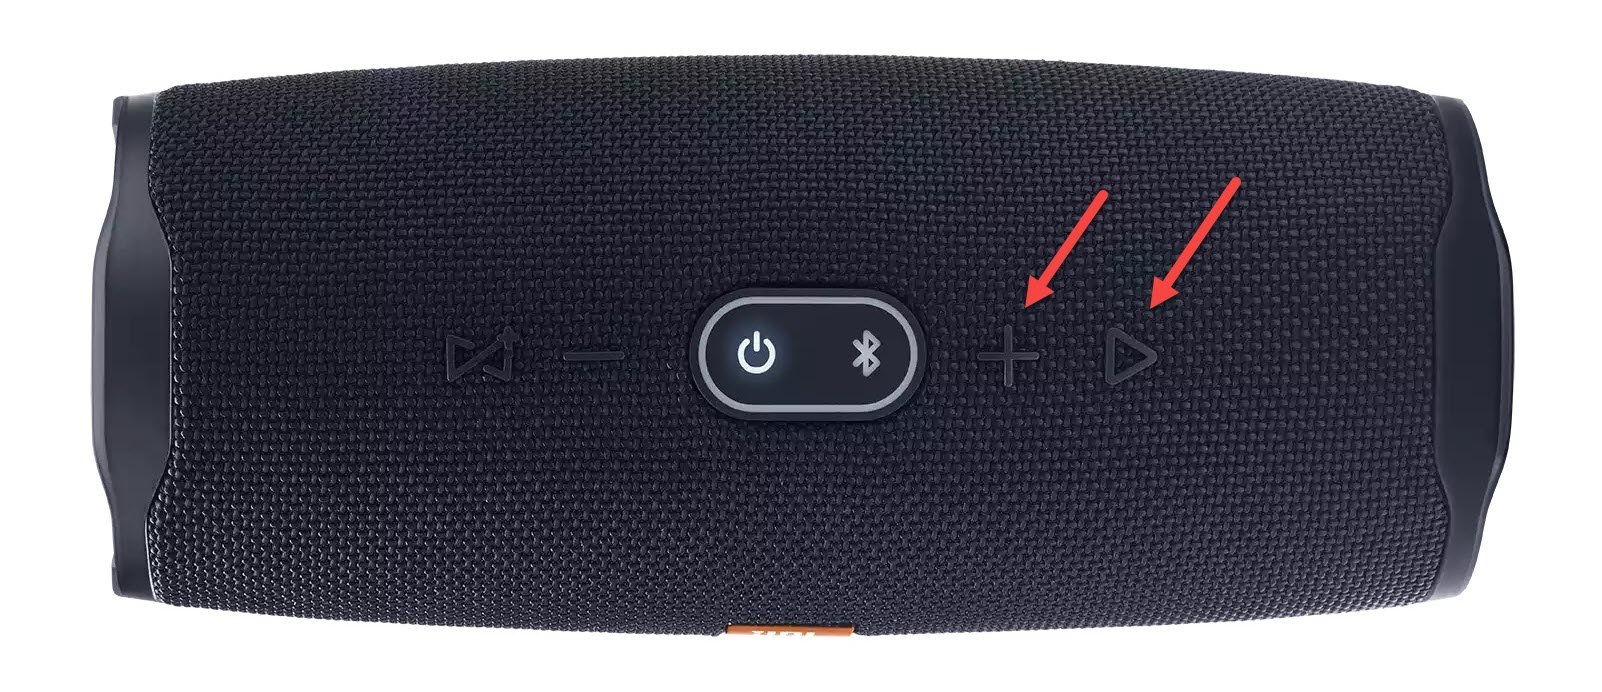 What to do when your JBL Charge 4 cannot connect to a Bluetooth device